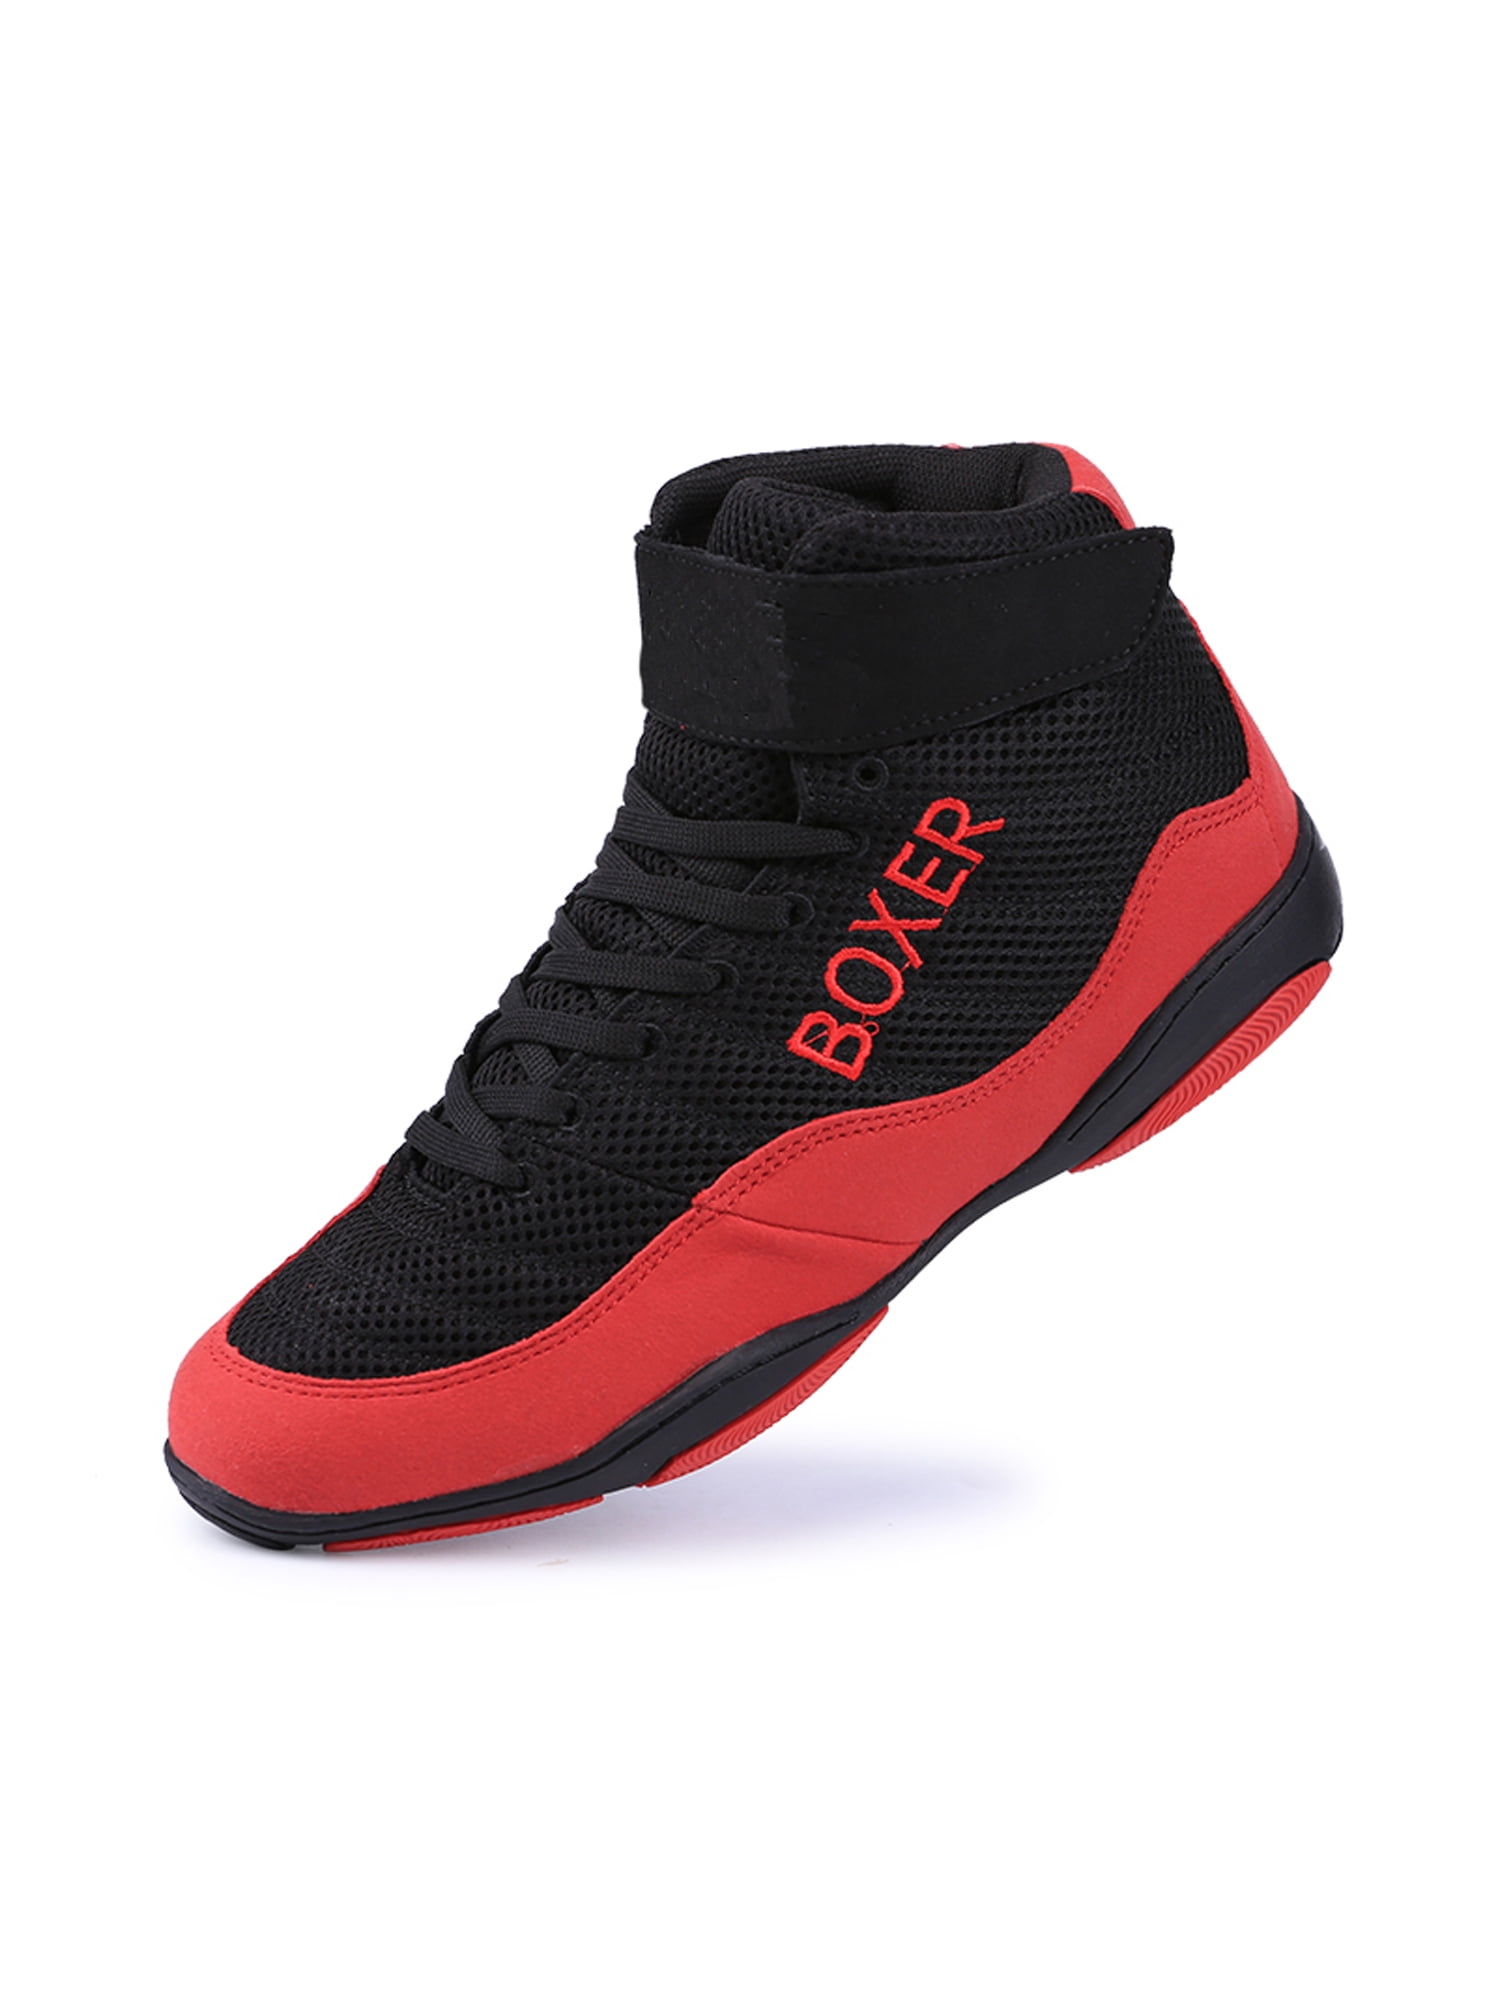 Ritualay Men's Boxing Shoes Training Sport Bodybuilding Weightlifting Wrestling  Shoes Fitness Gym Trainers Sneakers Red 4.5Y